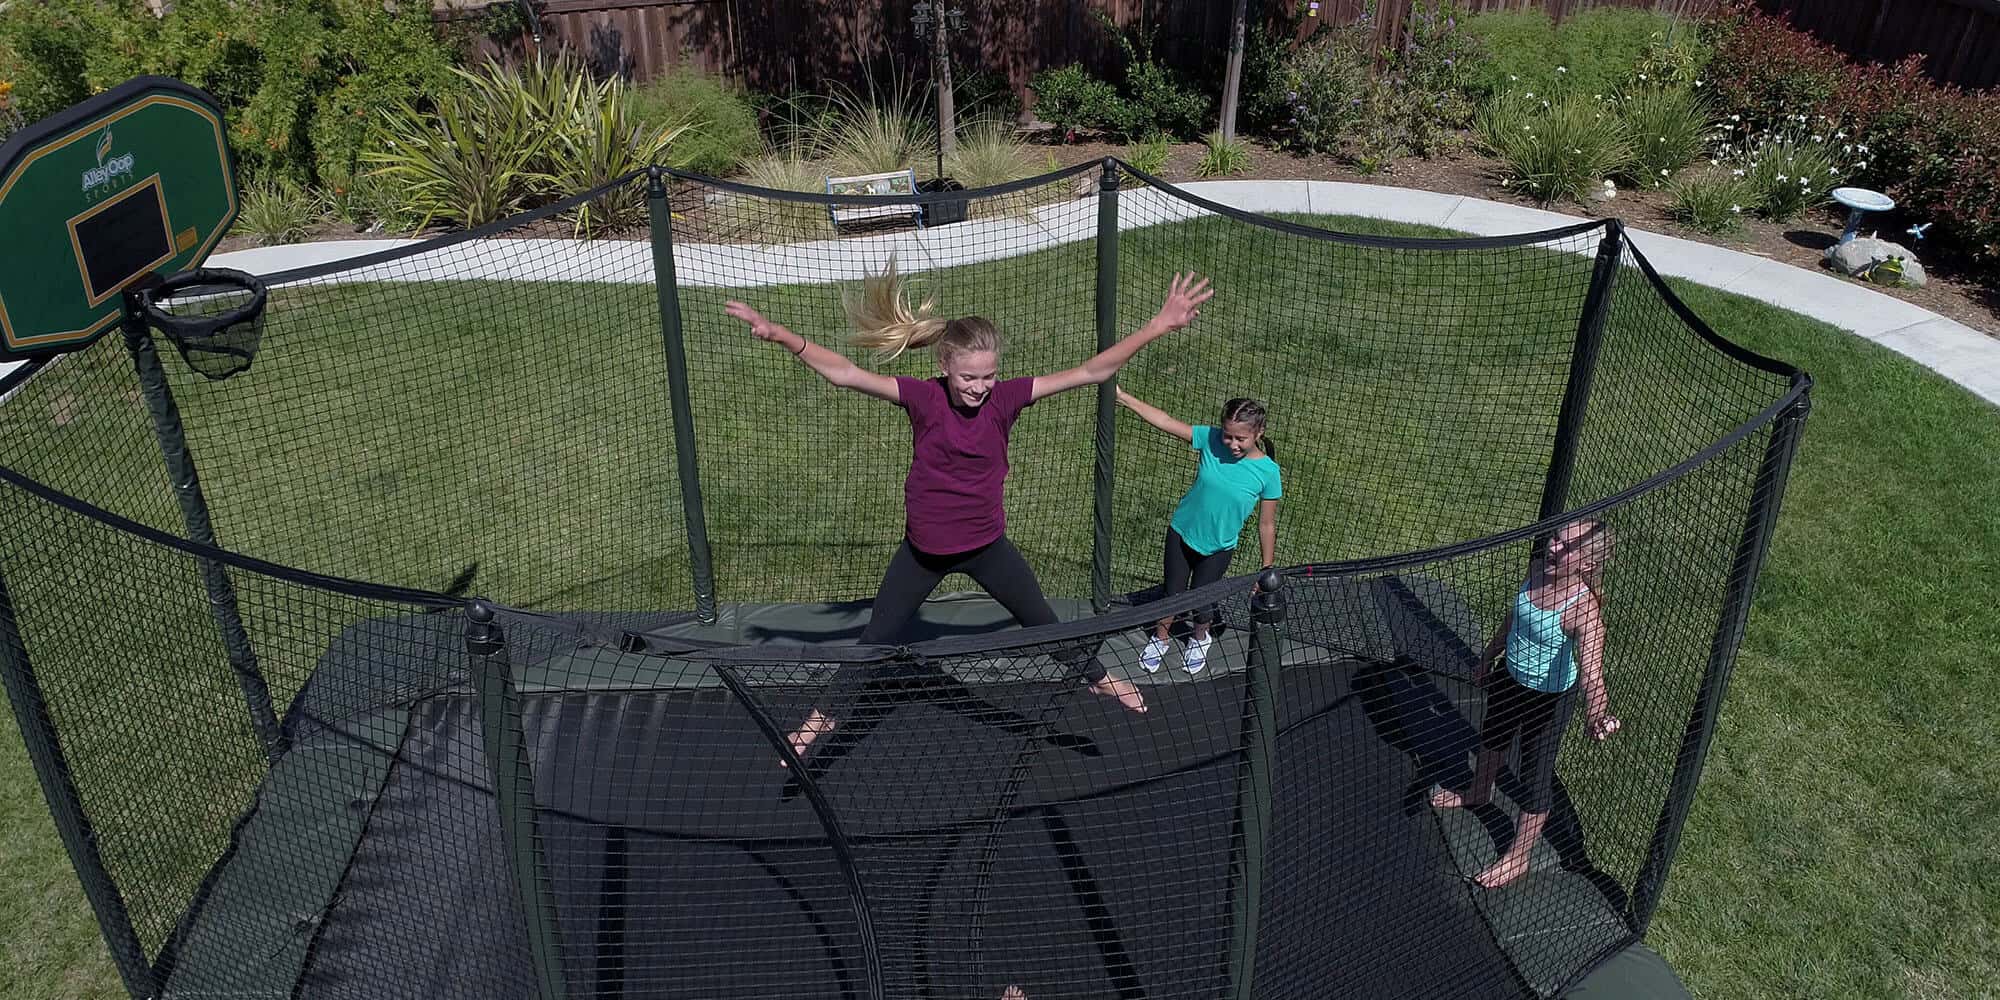 Teenagers jumping on a trampoline